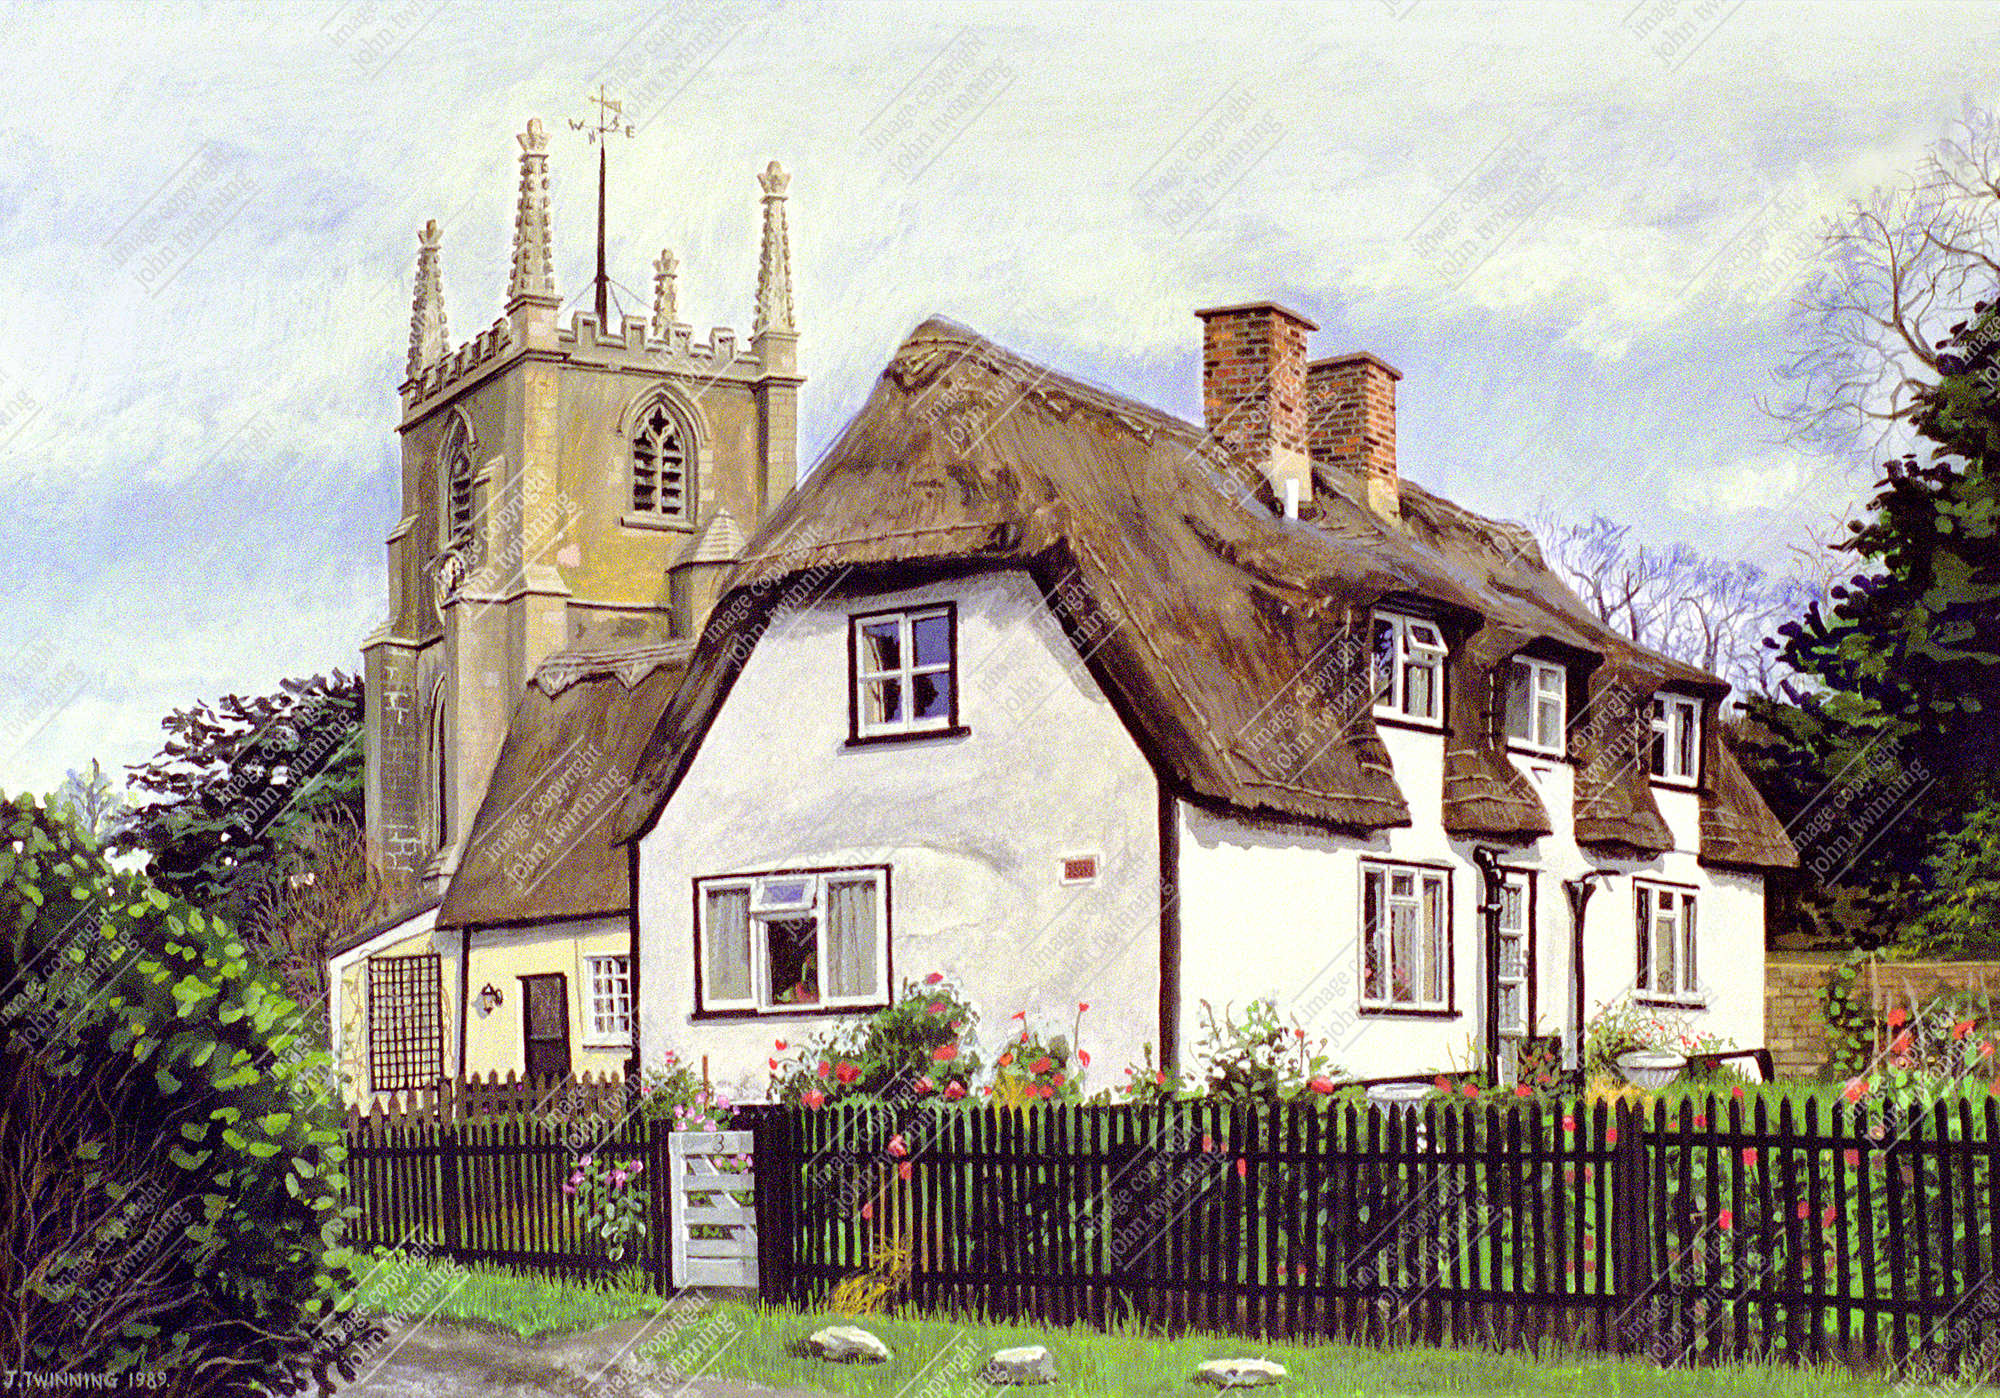 ‘Elsworth Village’ – art print from a watercolour painting of this lovely rural scene with parish church and cottages